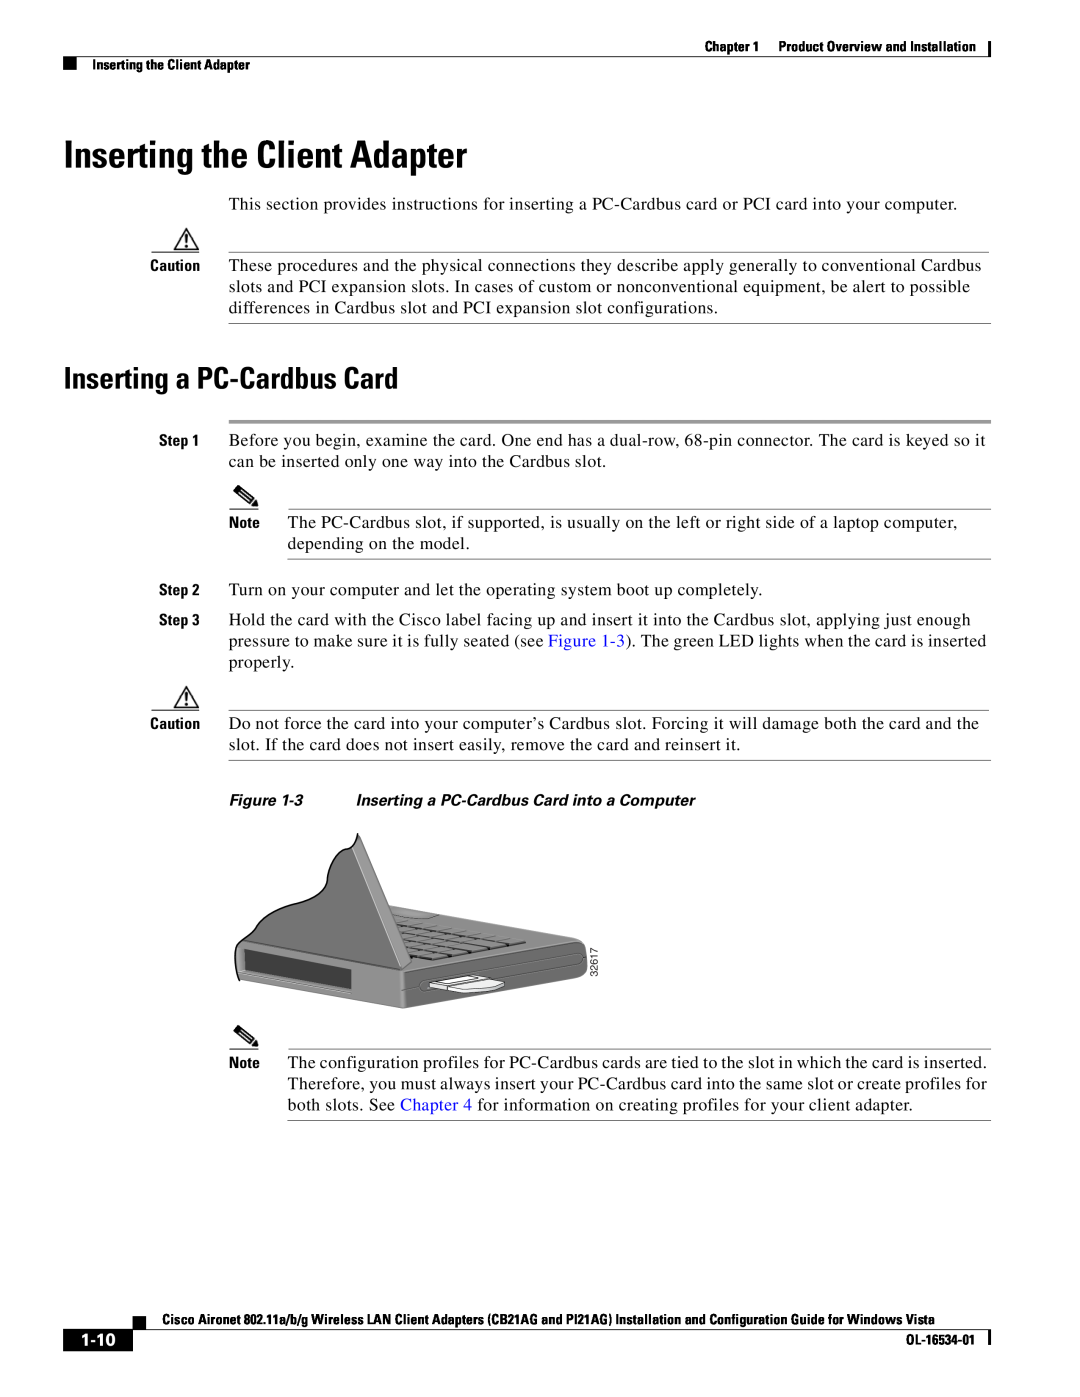 Cisco Systems PI21AG, CB21AG manual Inserting the Client Adapter, Inserting a PC-Cardbus Card, 1-10 